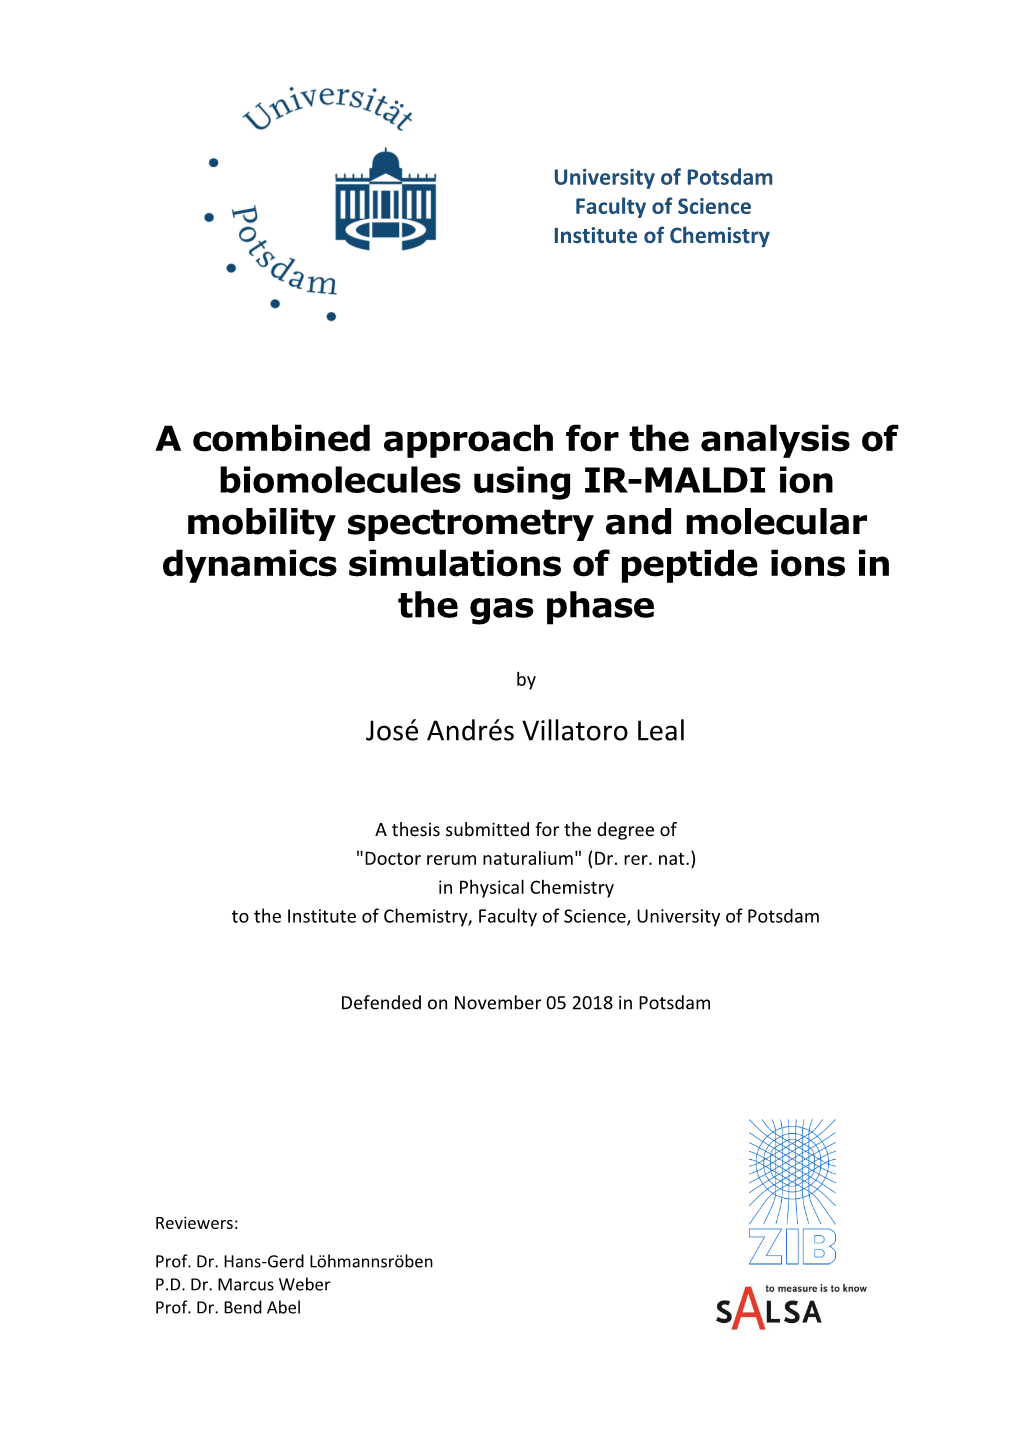 A Combined Approach for the Analysis of Biomolecules Using IR-MALDI Ion Mobility Spectrometry and Molecular Dynamics Simulations of Peptide Ions in the Gas Phase